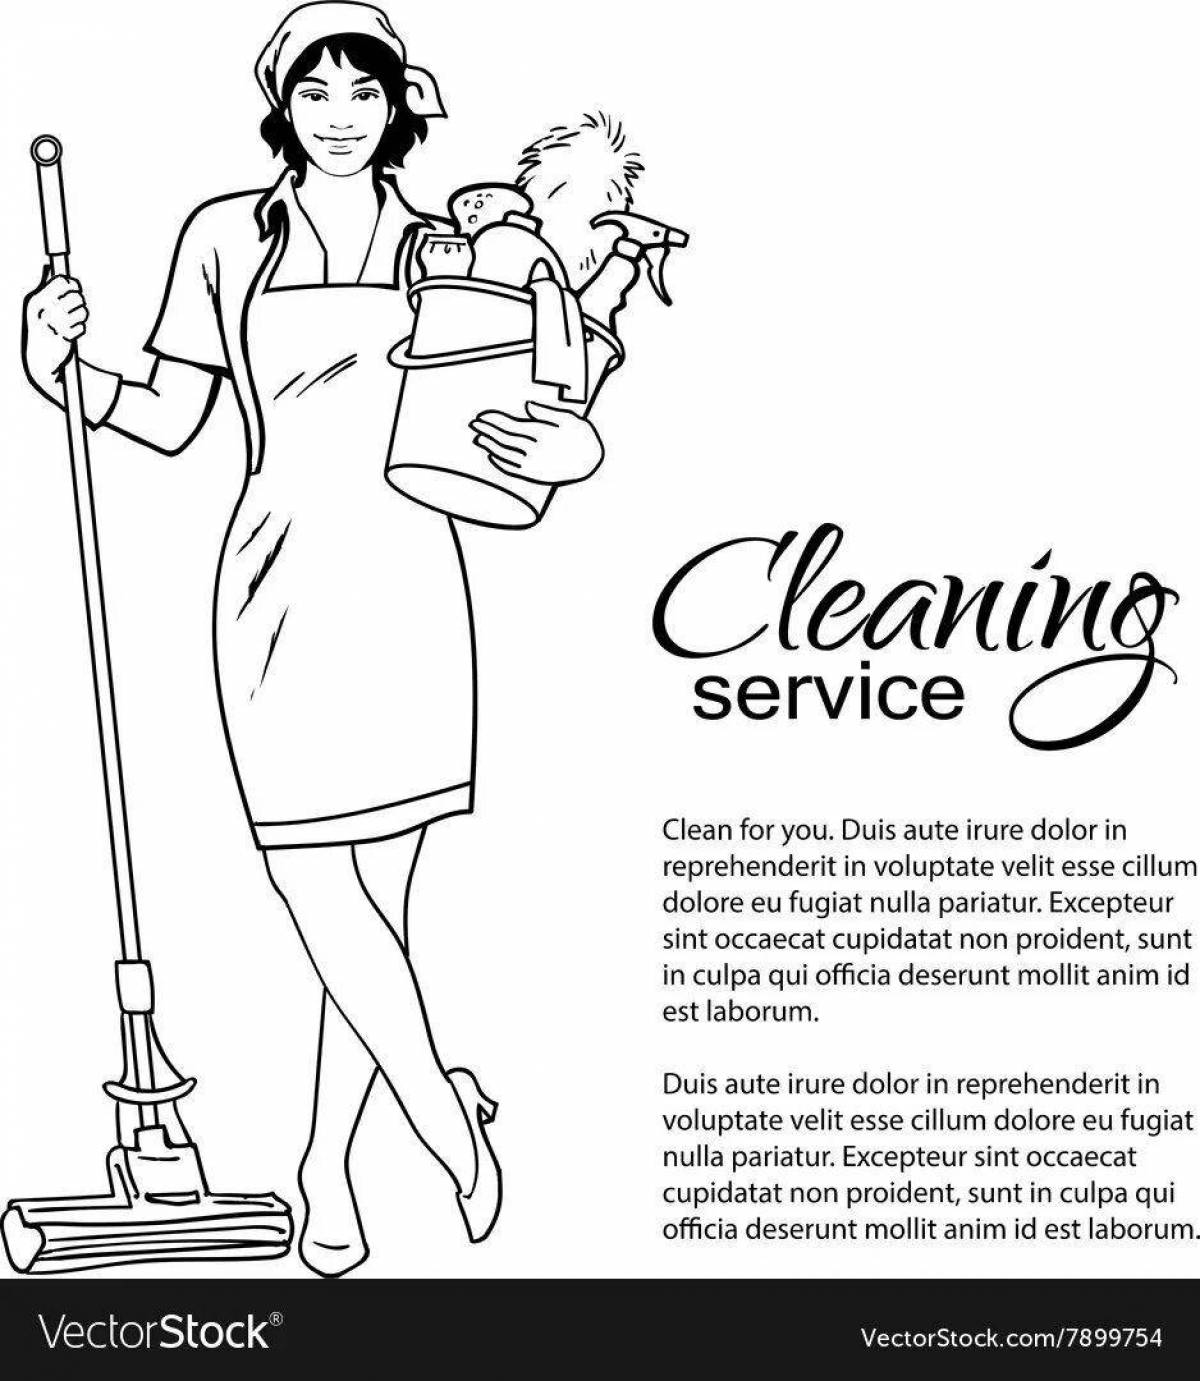 Watchful cleaner